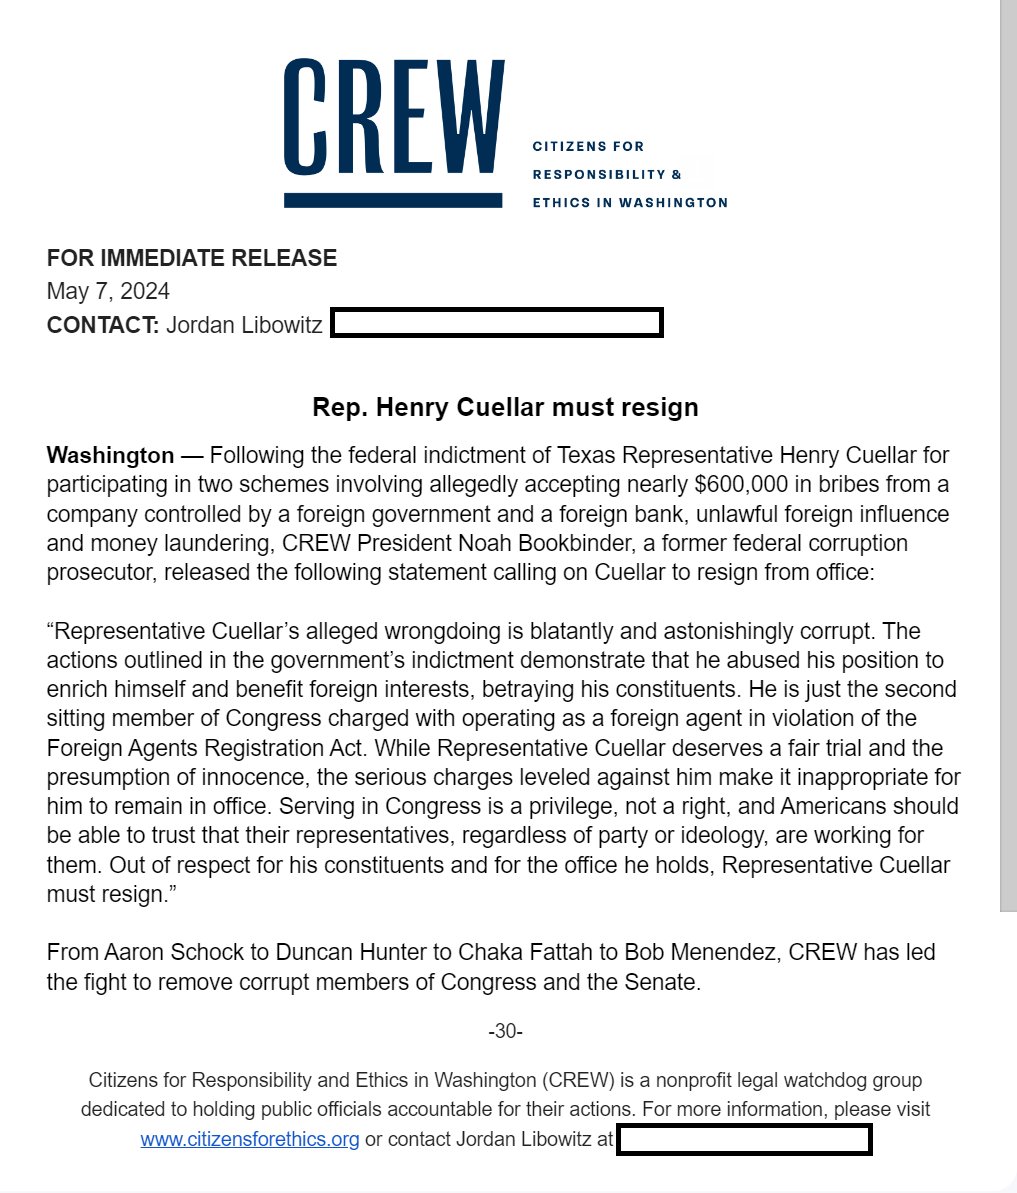 .@CREWcrew calls on @RepCuellar to resign, asserting that his indictment demonstrates 'he abused his position to enrich himself & benefit foreign interests.' (CREW is aligned with Dems, but has worked to cast itself as bipartisan, previously calling for Bob Menendez to resign.)